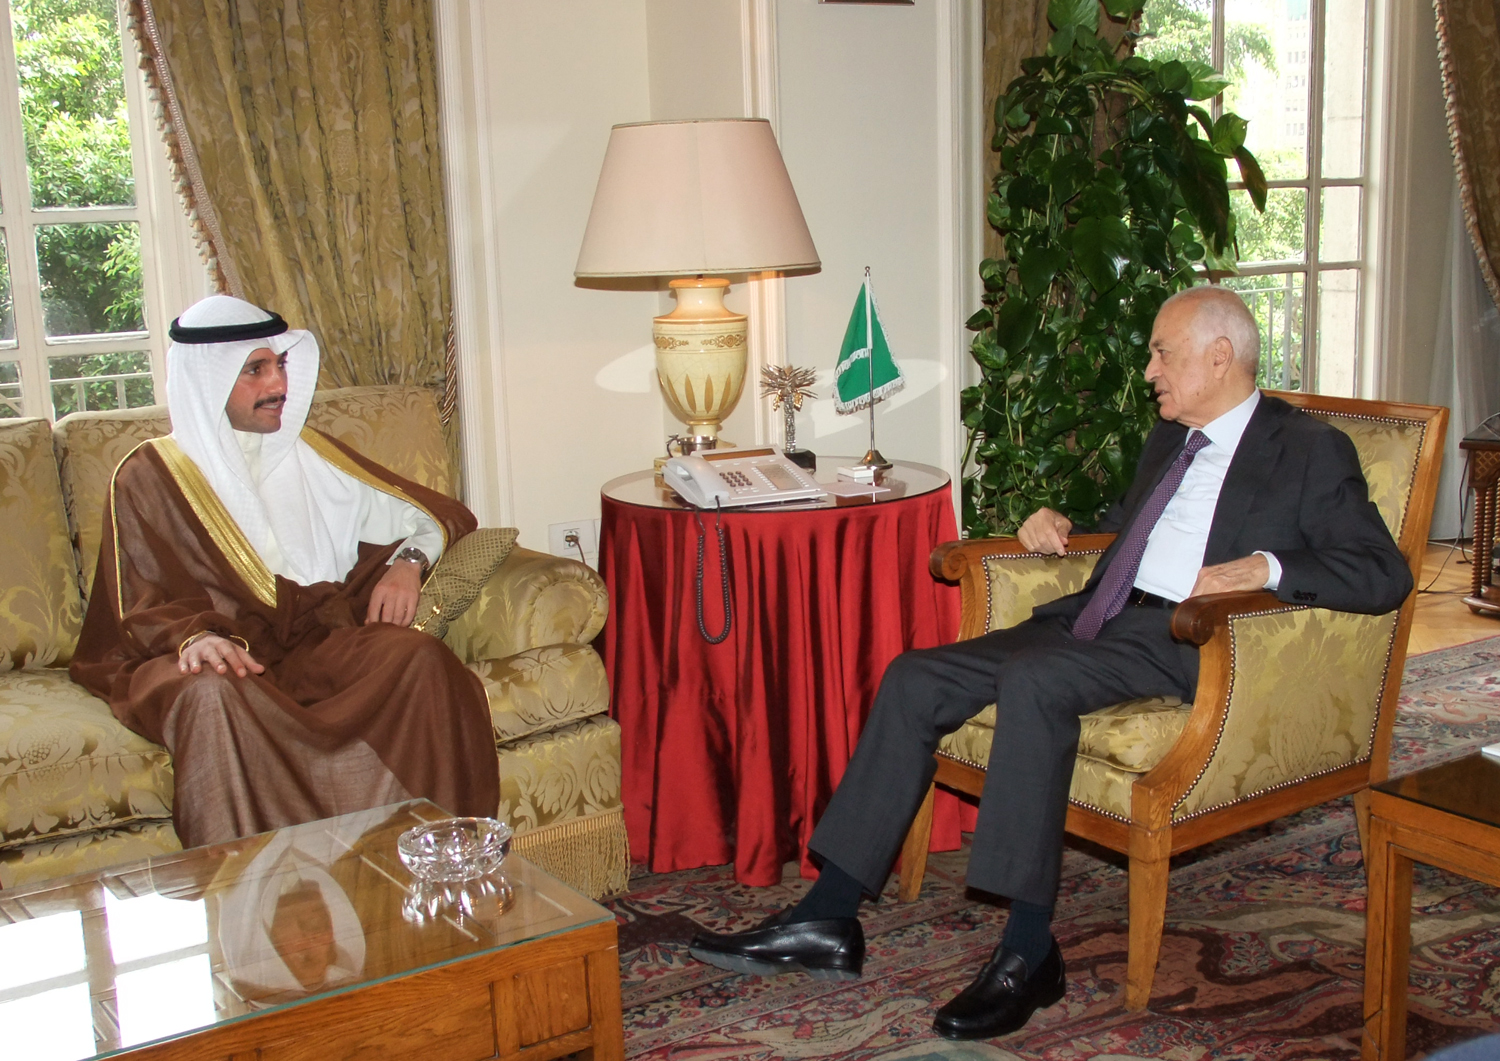 Kuwaiti National Assembly Speaker and President of the Arab Parliamentary Union (APU) Marzouq Al-Ghanim with the Secretary General of the League of Arab States, Dr. Nabil Al-Araby